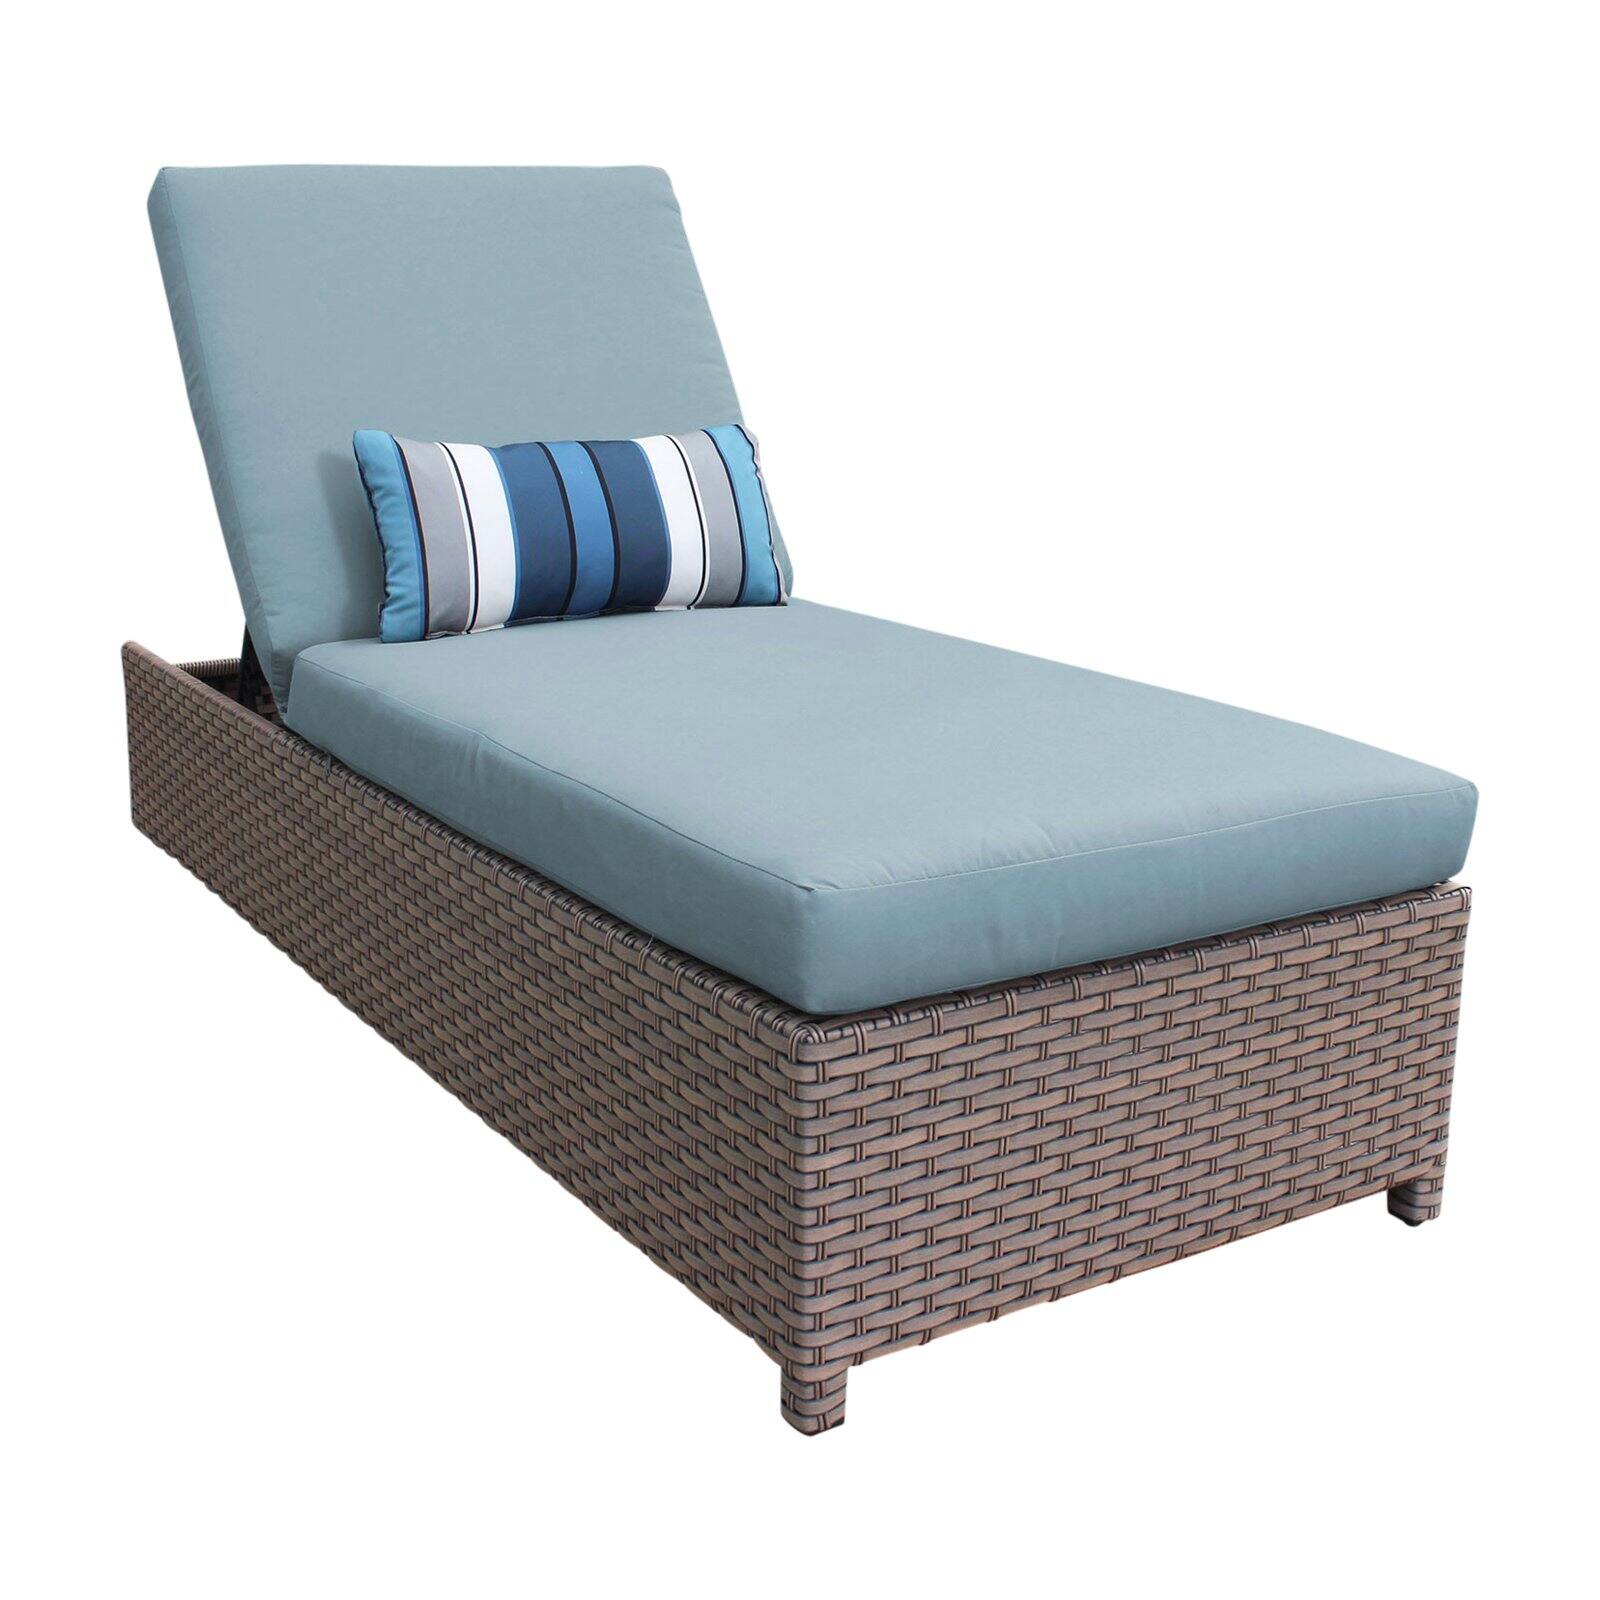 TK Classics Florence Wheeled Wicker Outdoor Chaise Lounge Chair - image 2 of 11